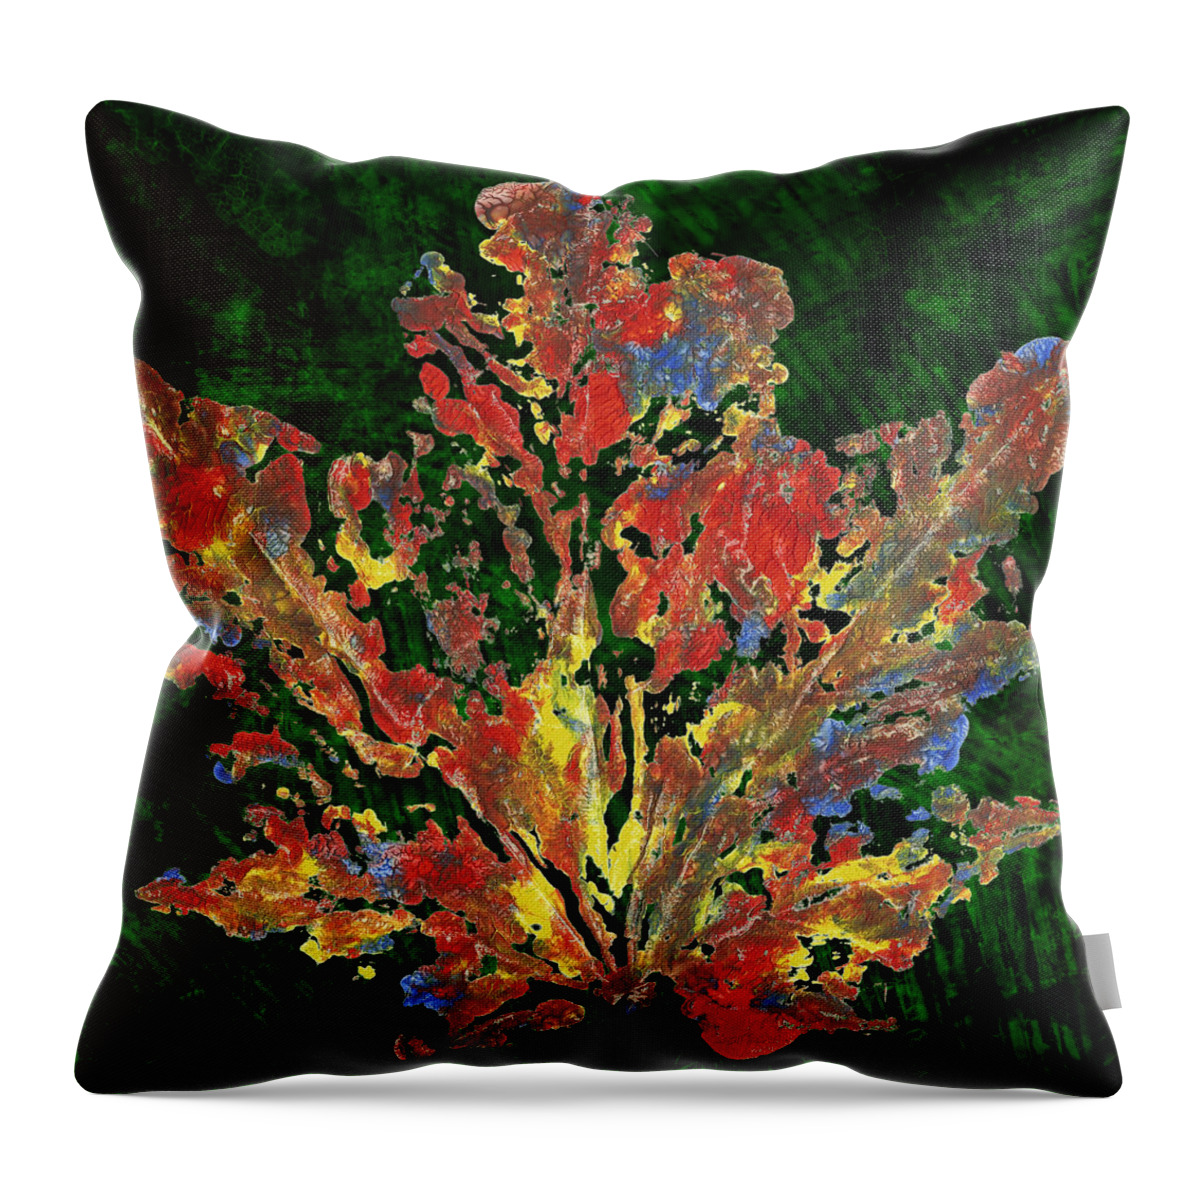 Autumn Throw Pillow featuring the painting Painted Nature 1 by Sami Tiainen